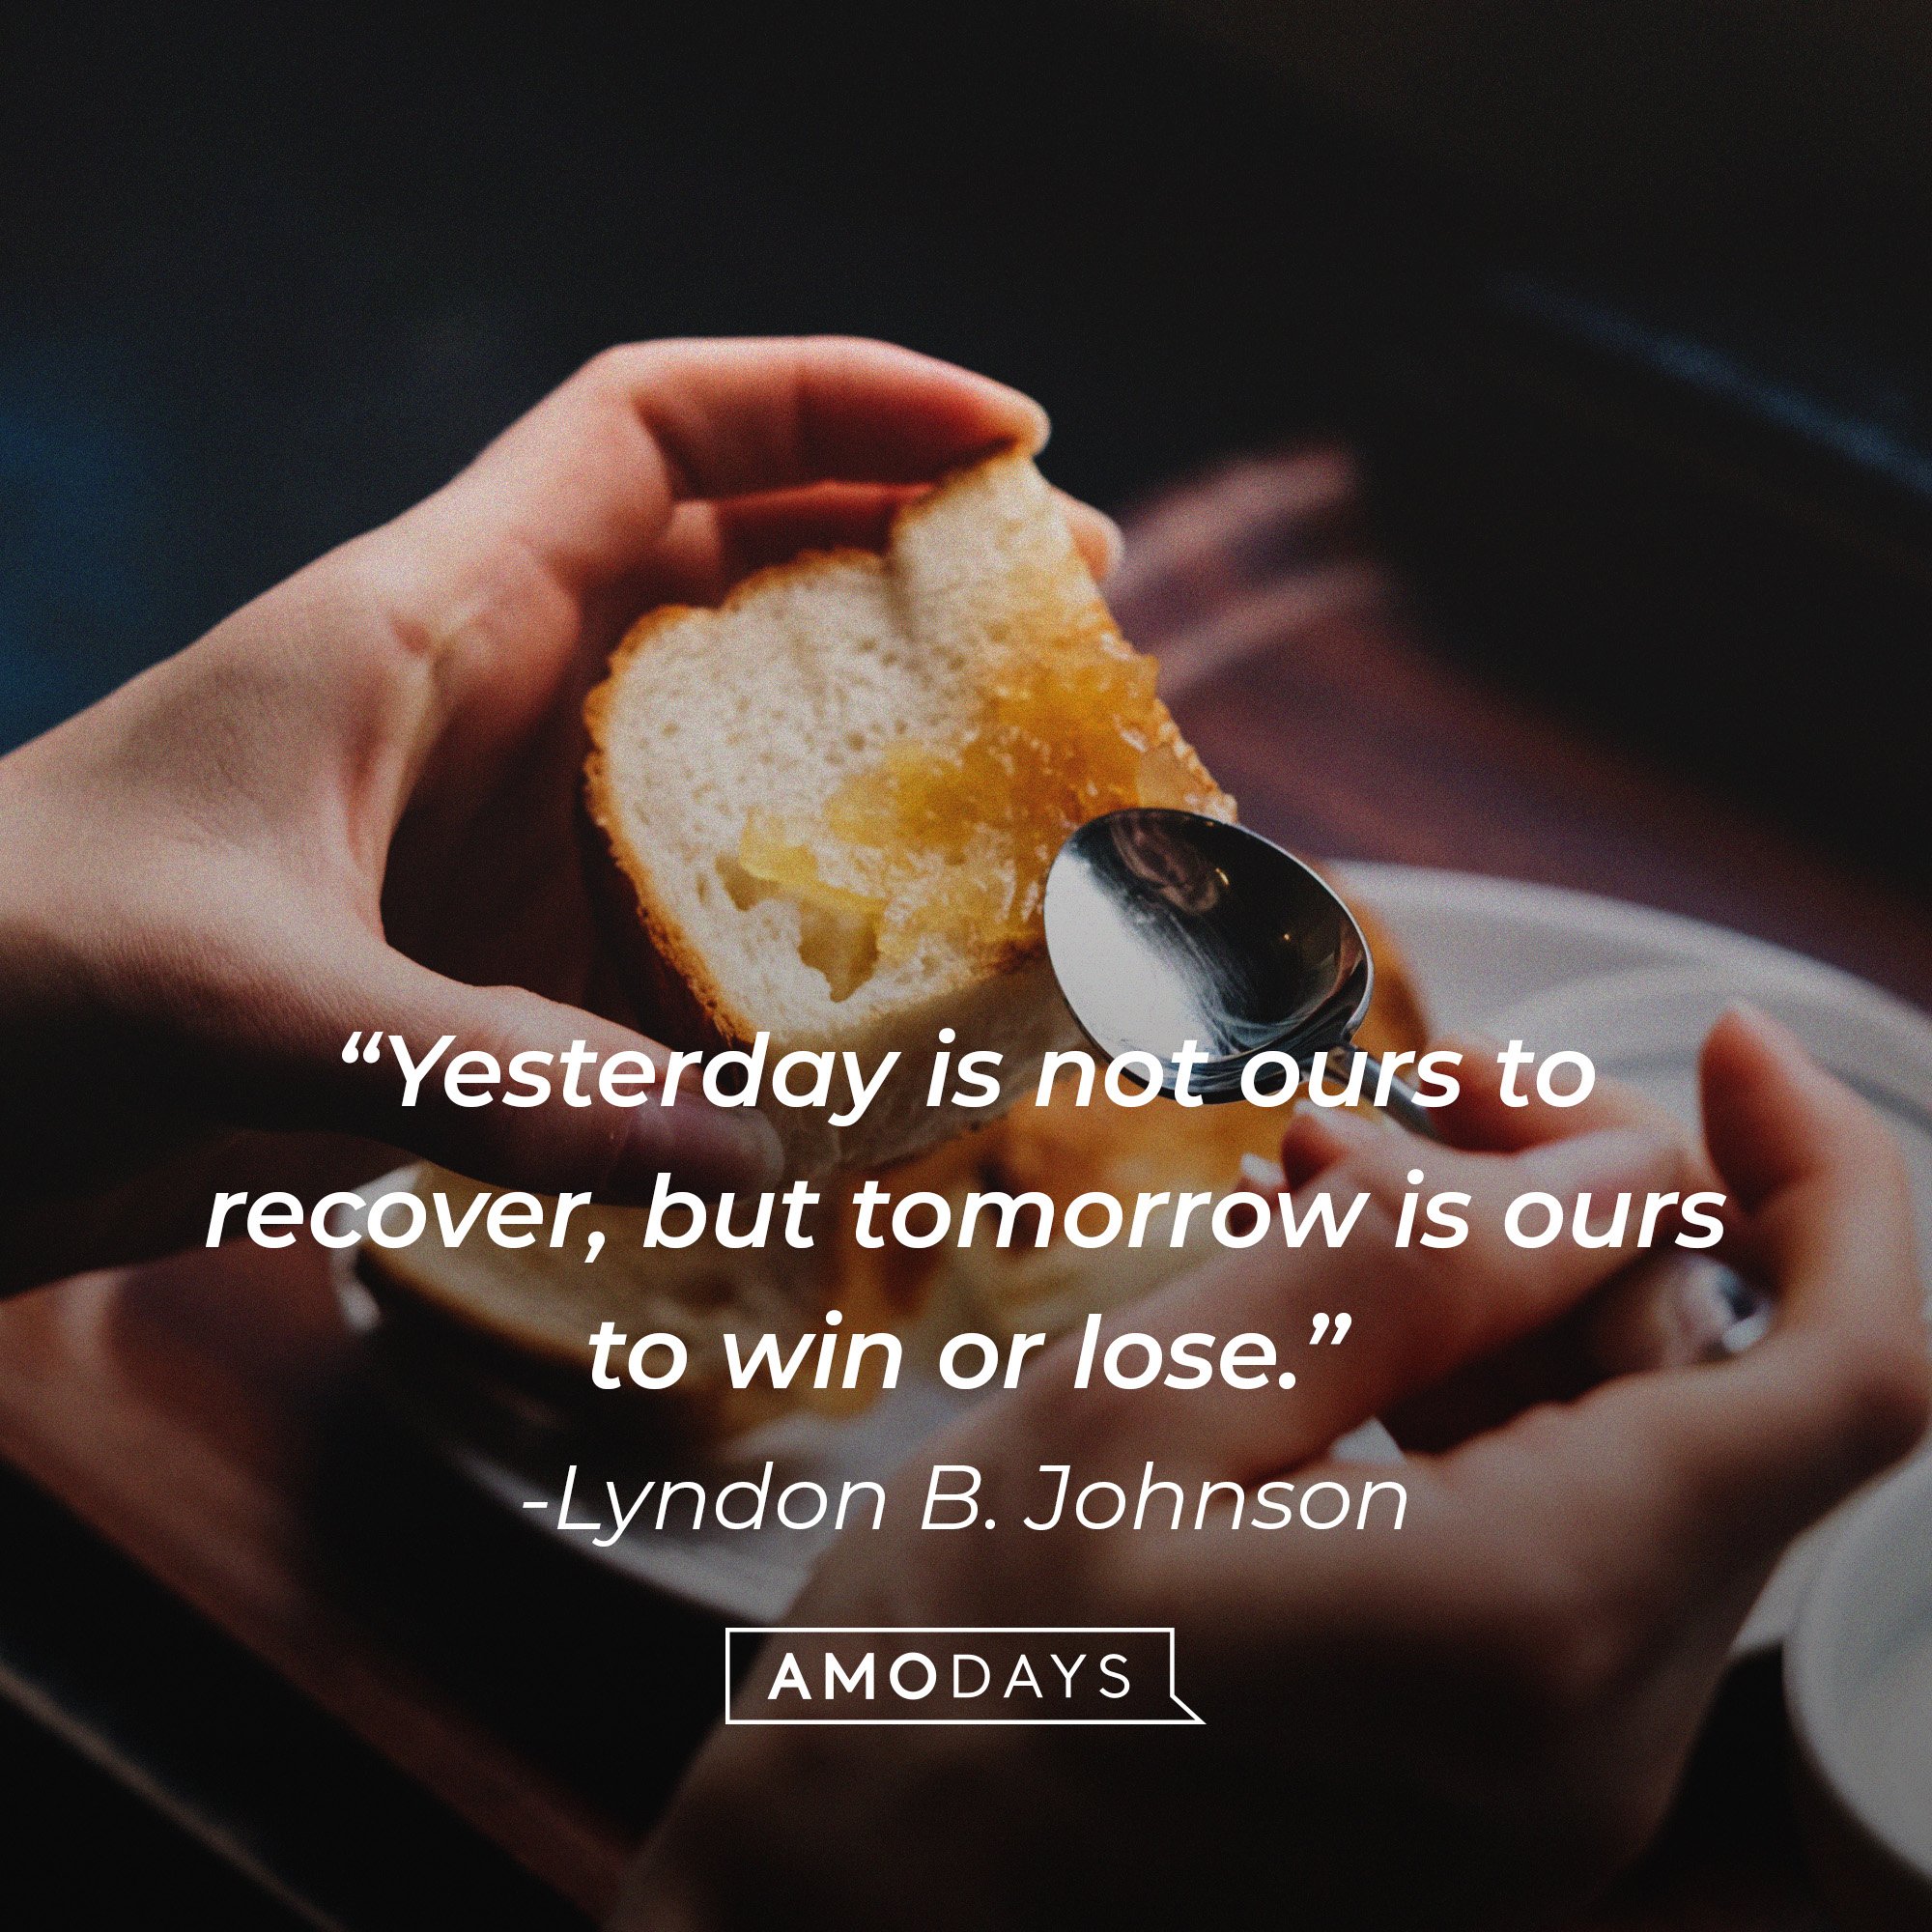 Lyndon B. Johnson's quote: “Yesterday is not ours to recover, but tomorrow is ours to win or lose.” | Image: AmoDays 